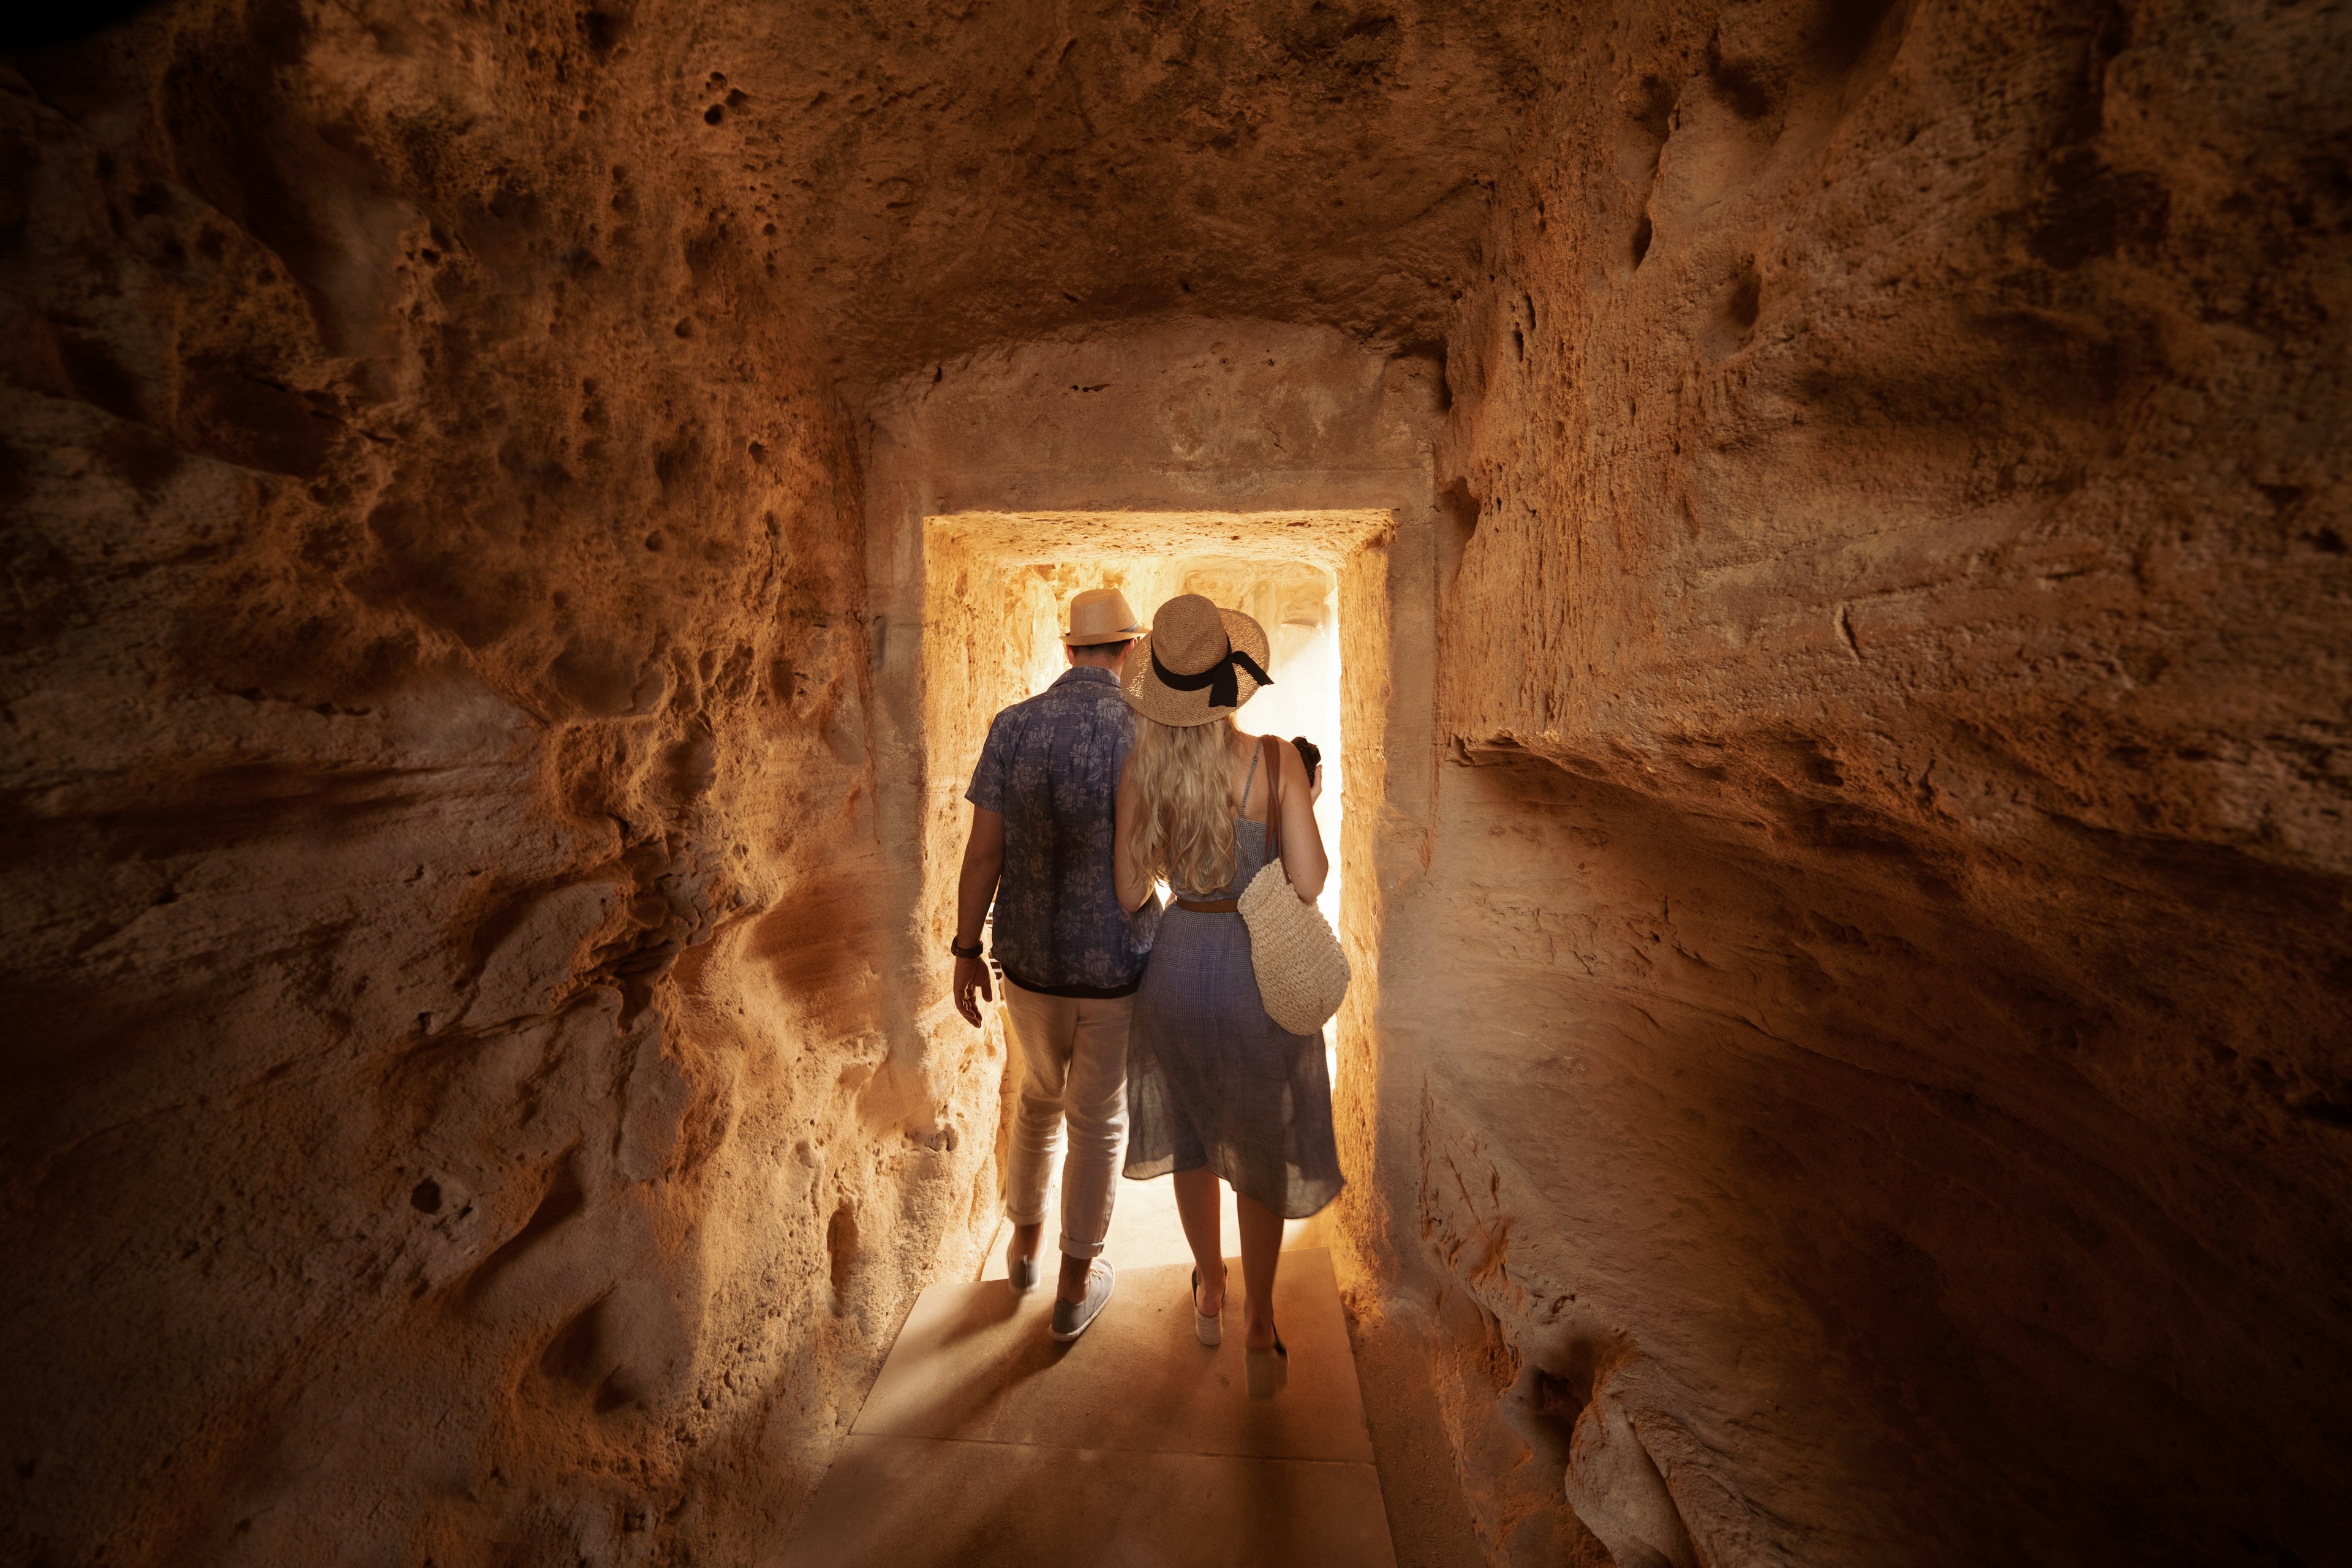 Man and woman walking through tunnel at the Tombs of the Kings